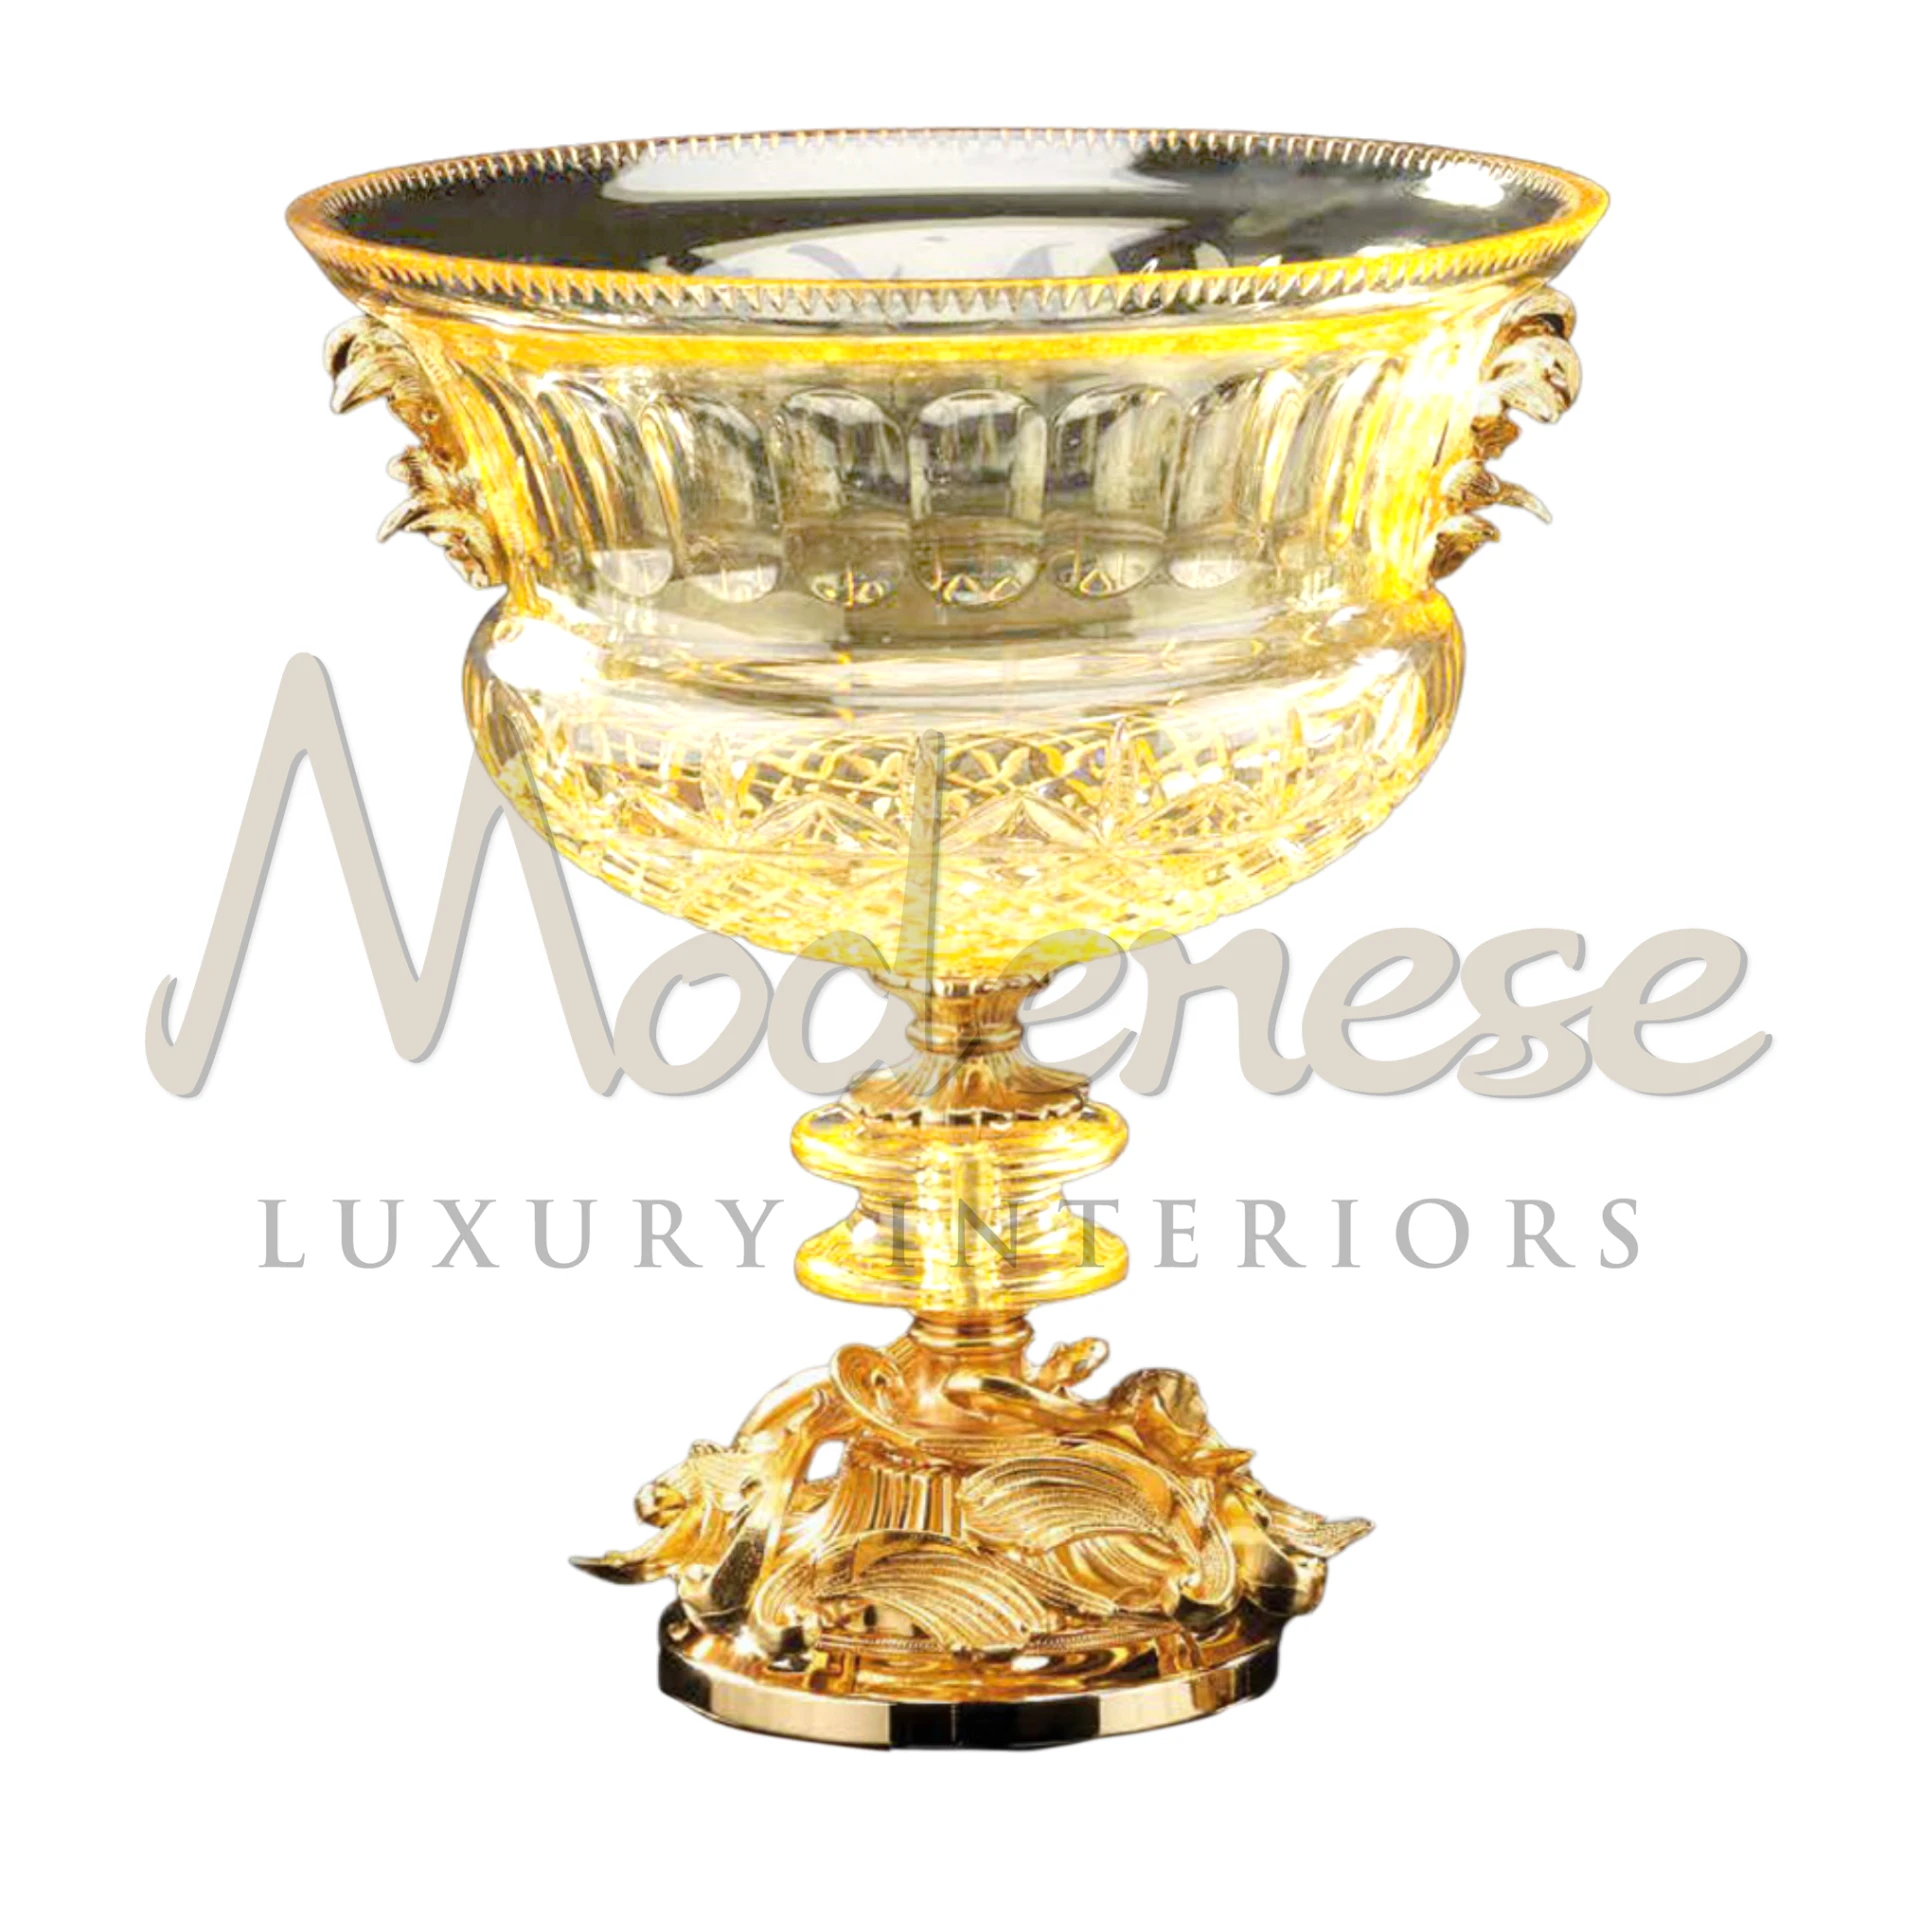 Royal Light Yellow Glass Bowl with ornate details and elegant shape, a regal piece for enhancing luxury and classic style in interior design.